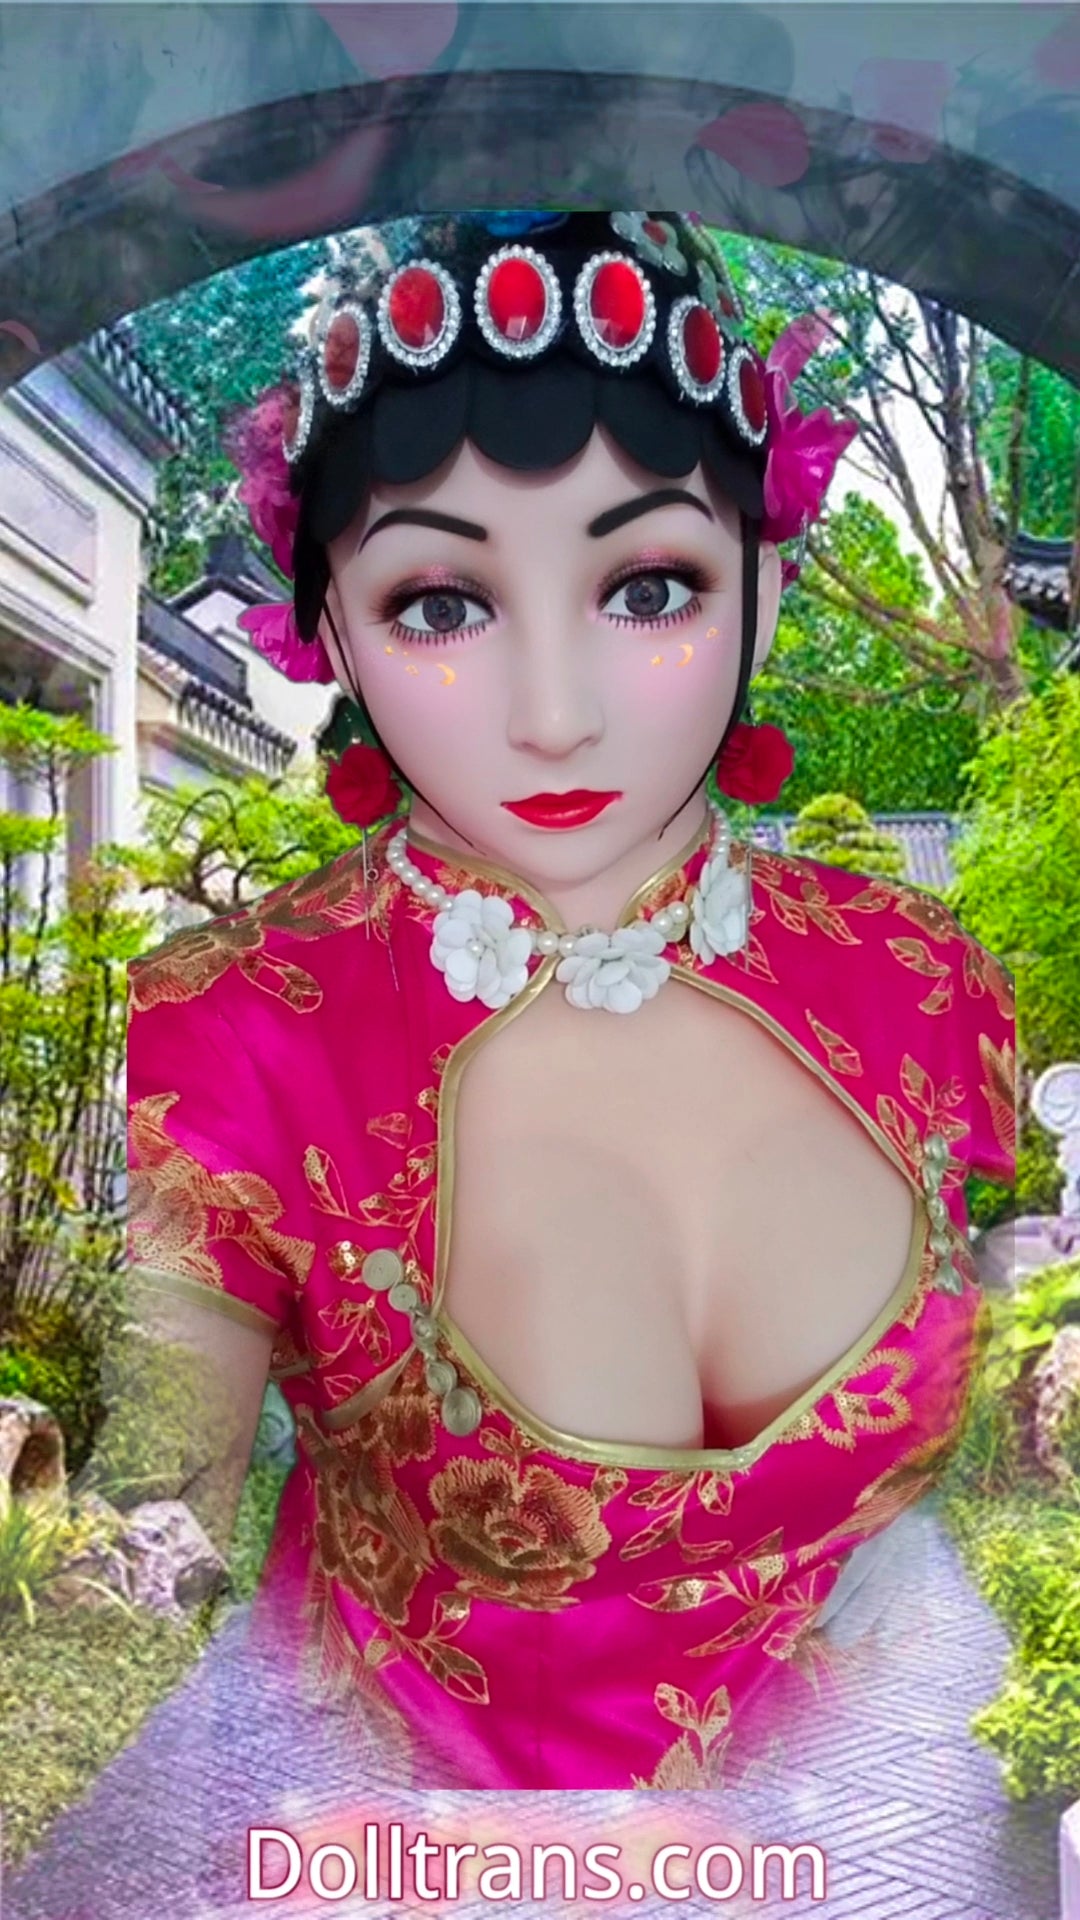 Gorgeous China Dress is ready for your doll transformation